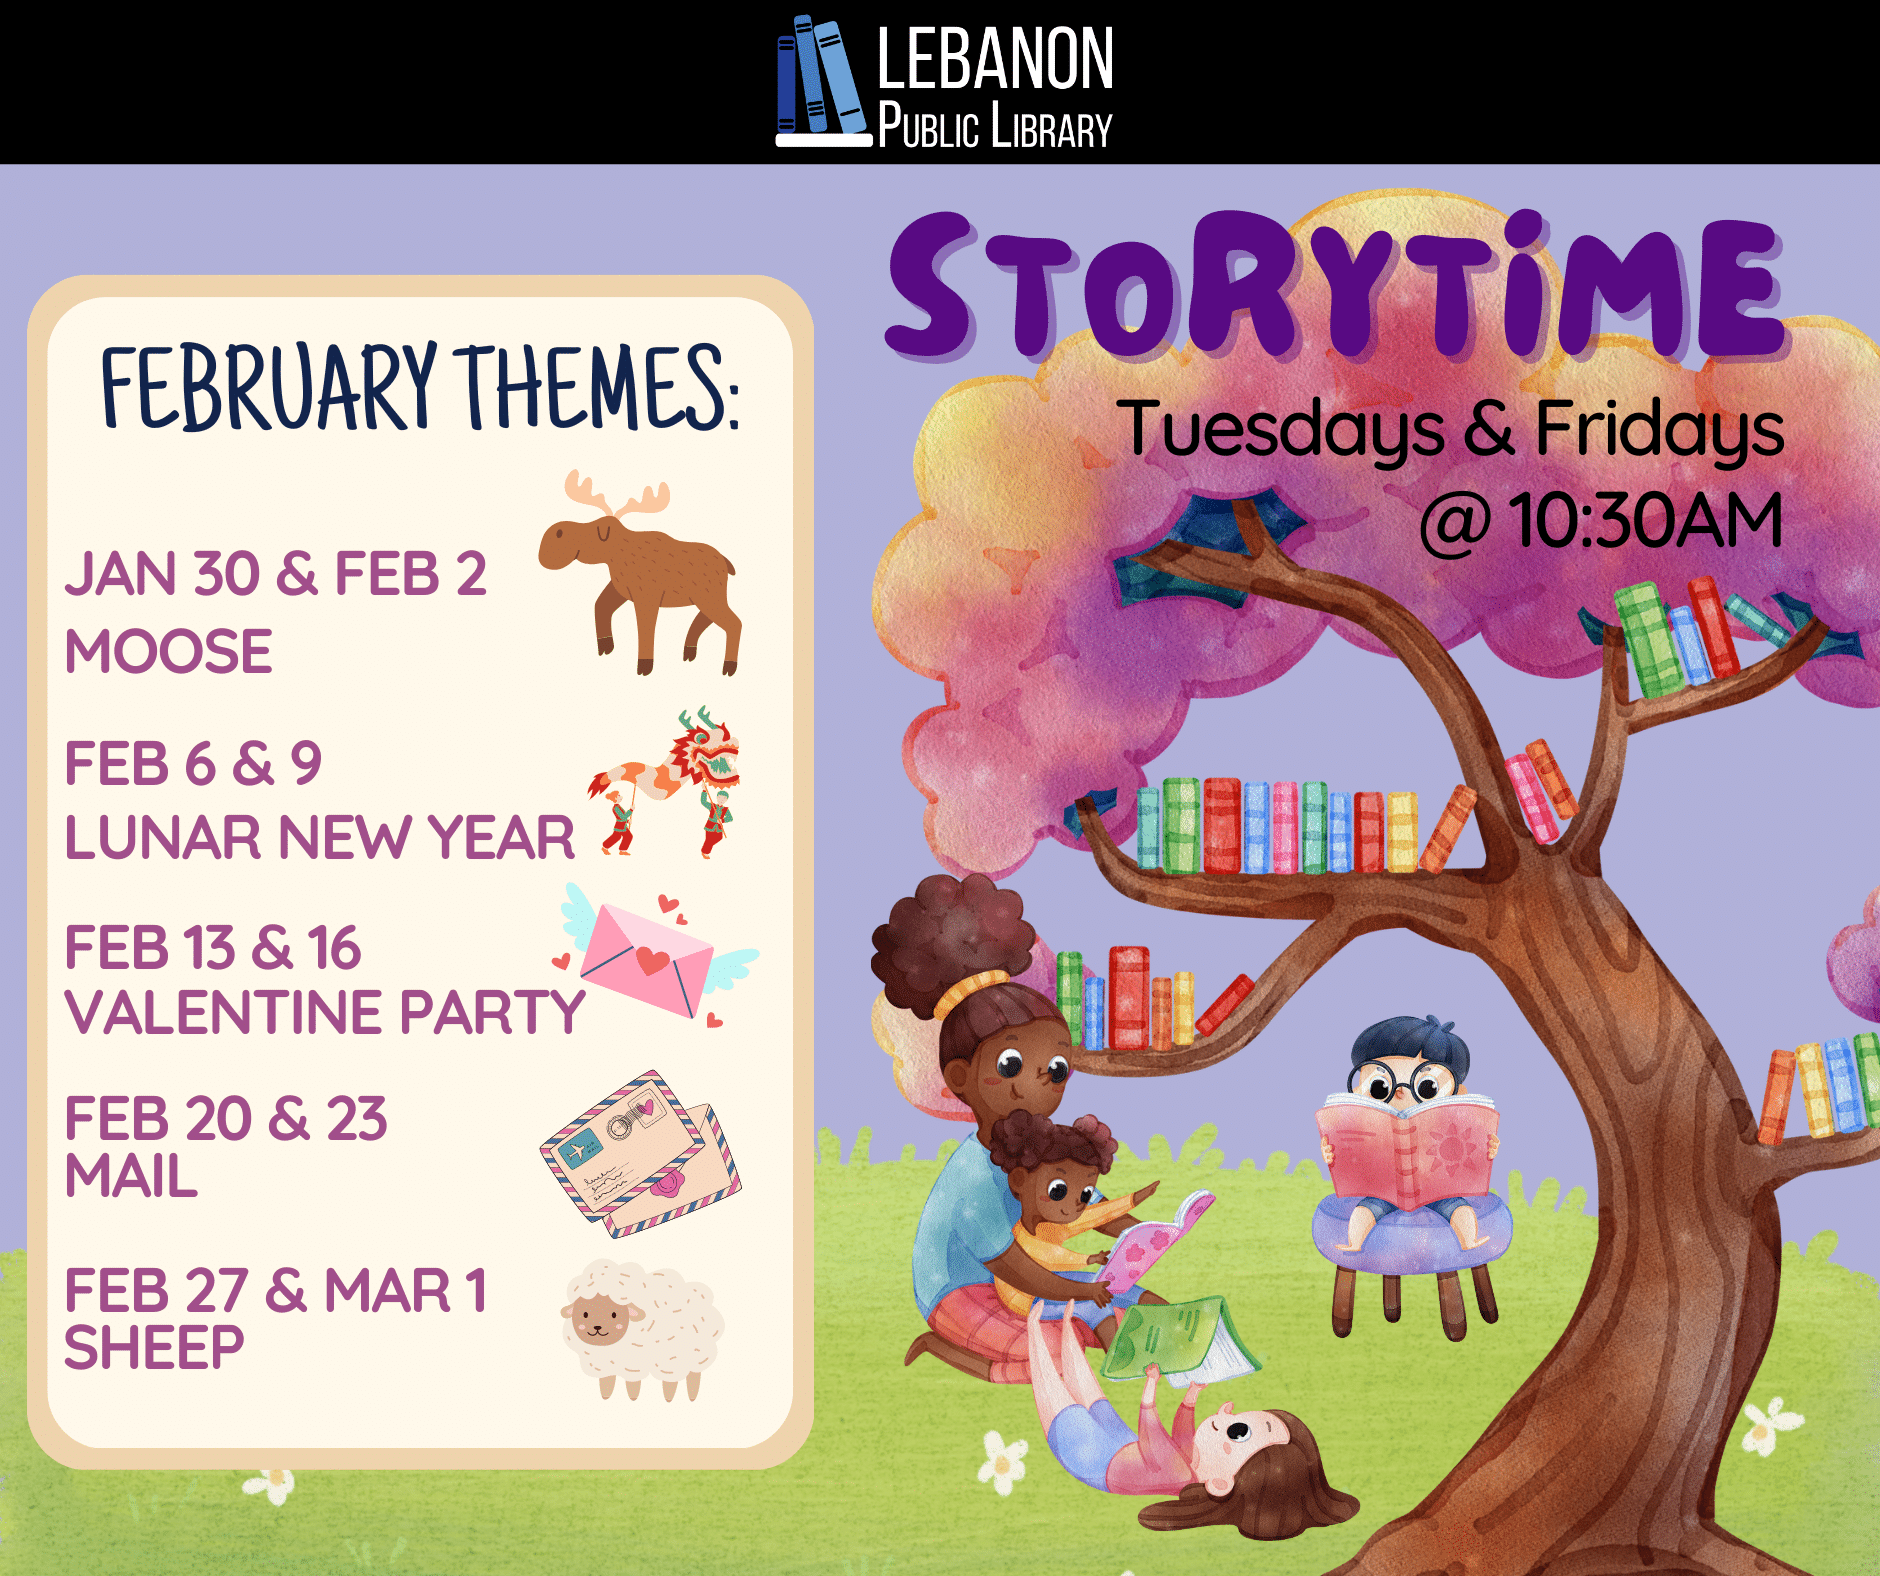 Storytime Tuesdays and Fridays at 10:30 a.m.